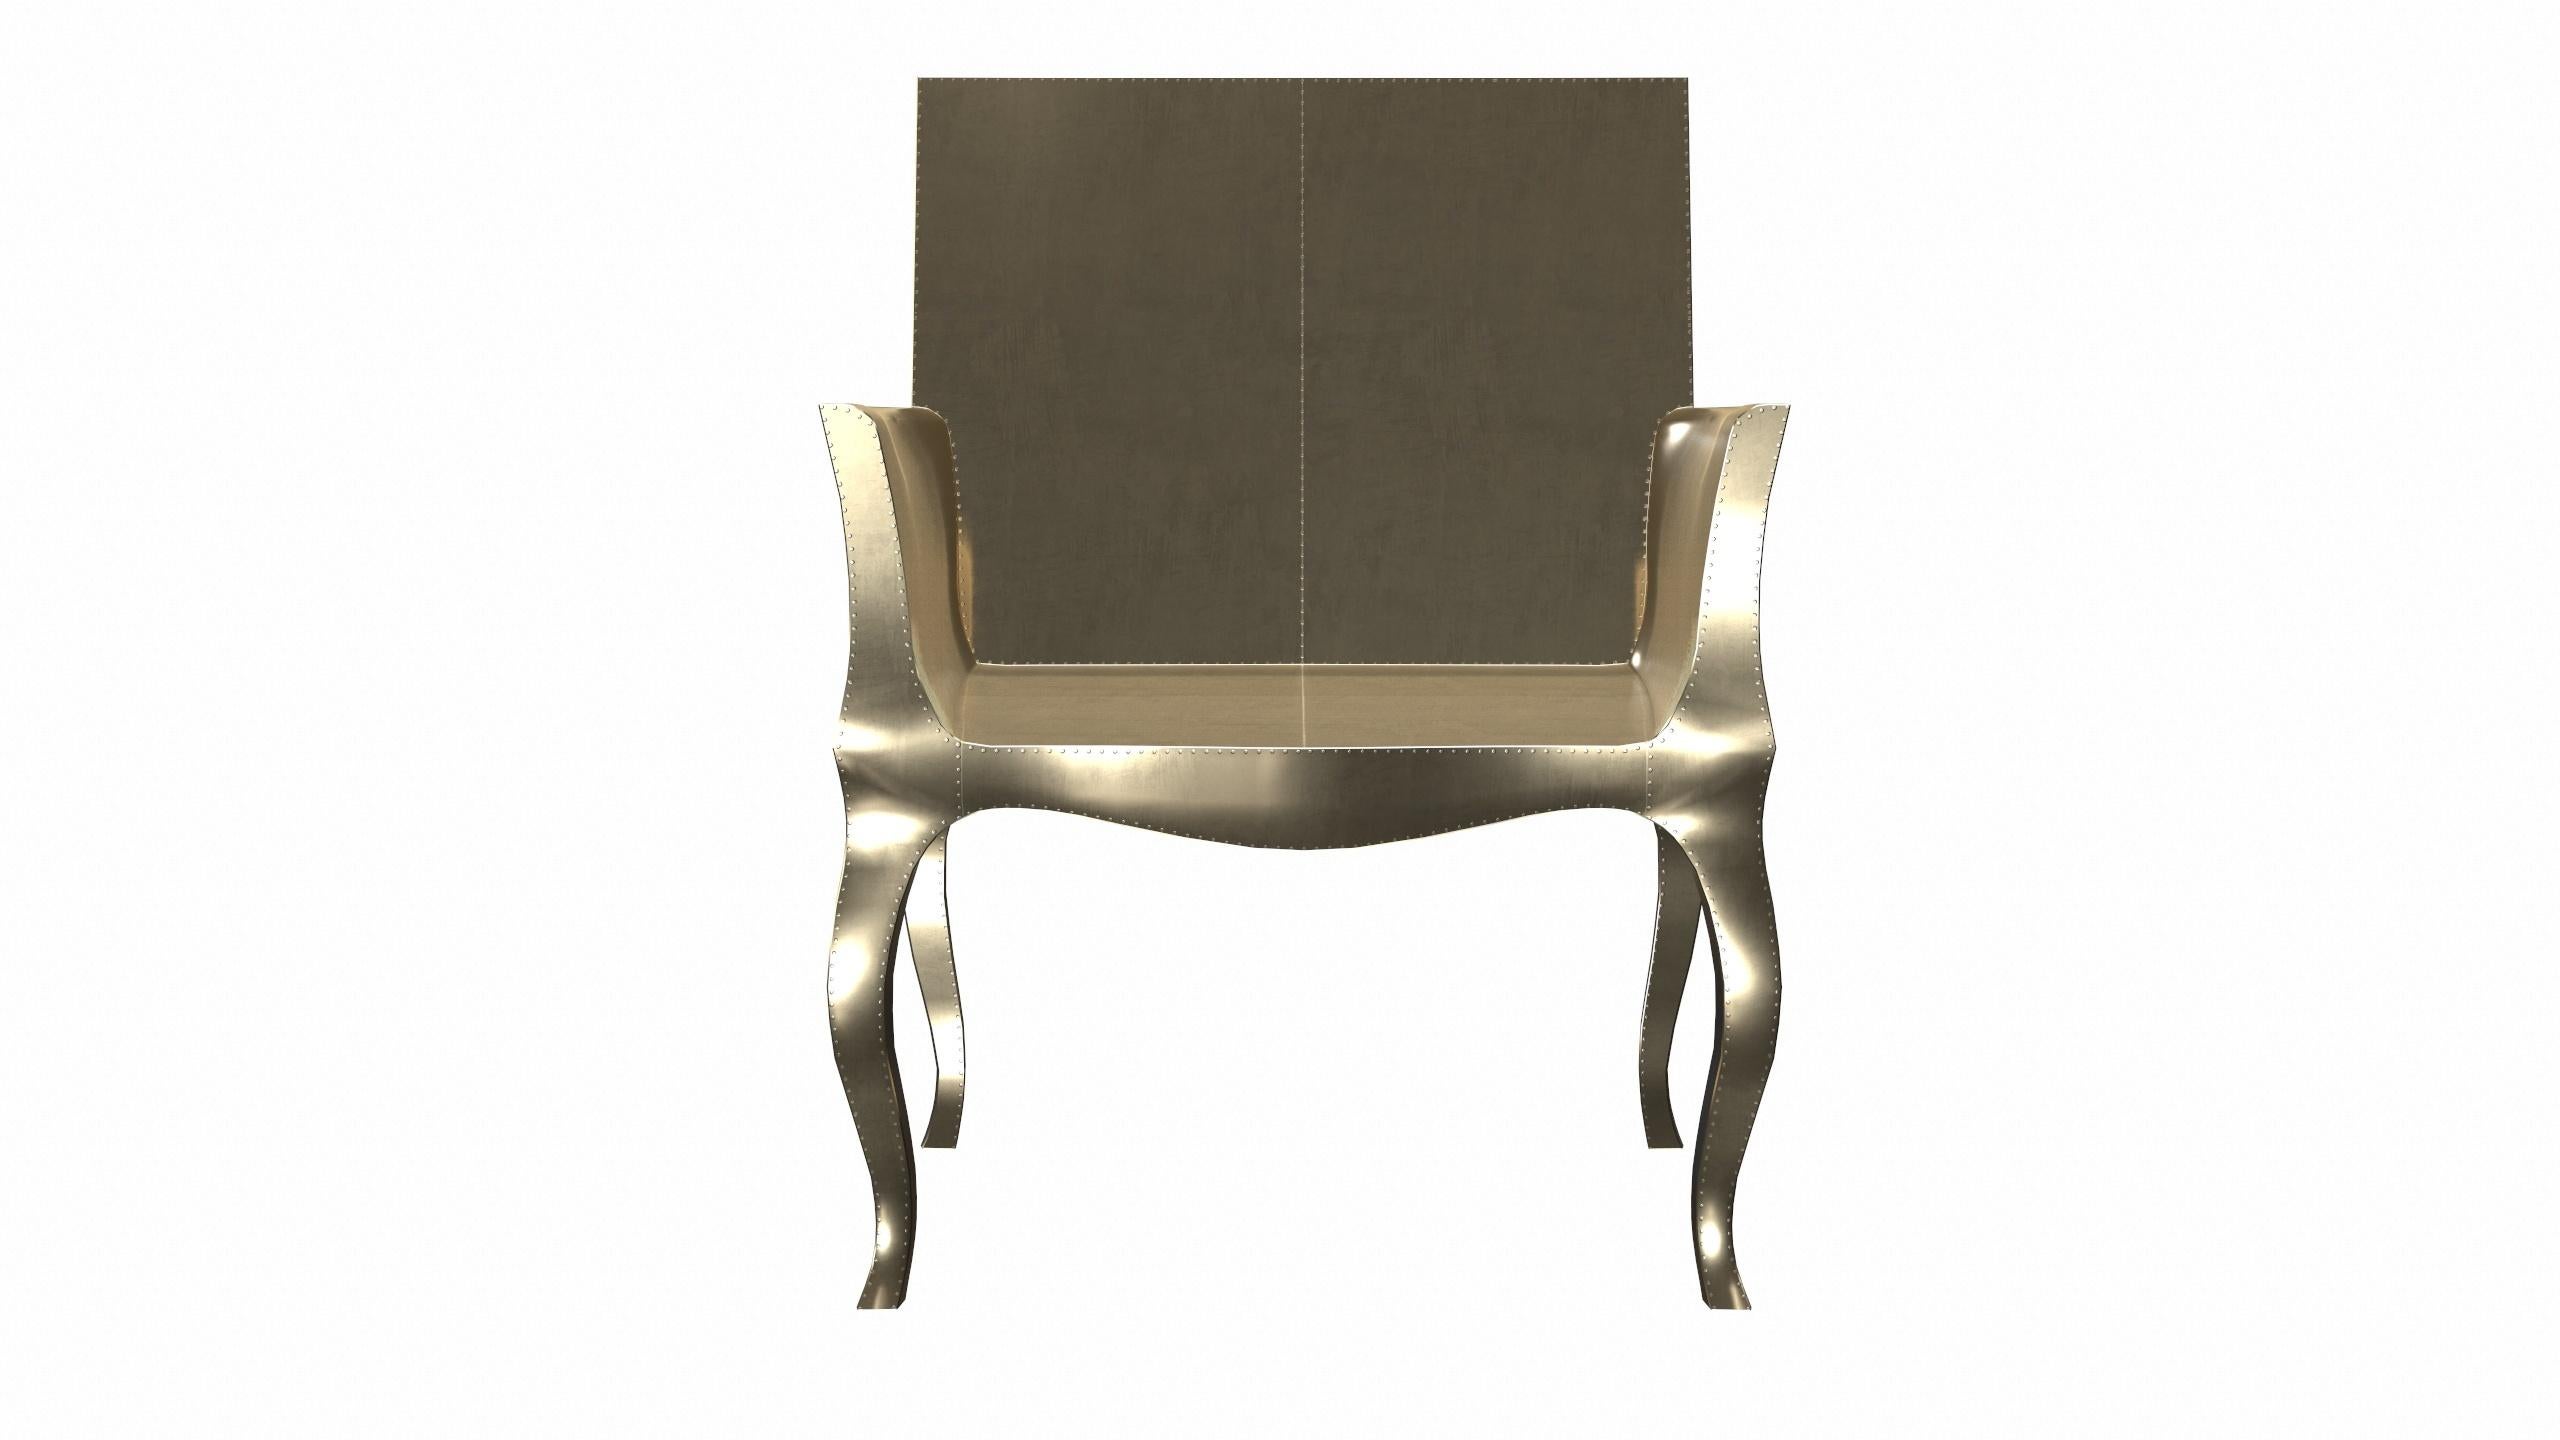 Indian Art Nouveau Dining Chairs in Smooth Brass by Paul Mathieu for S. Odegard For Sale